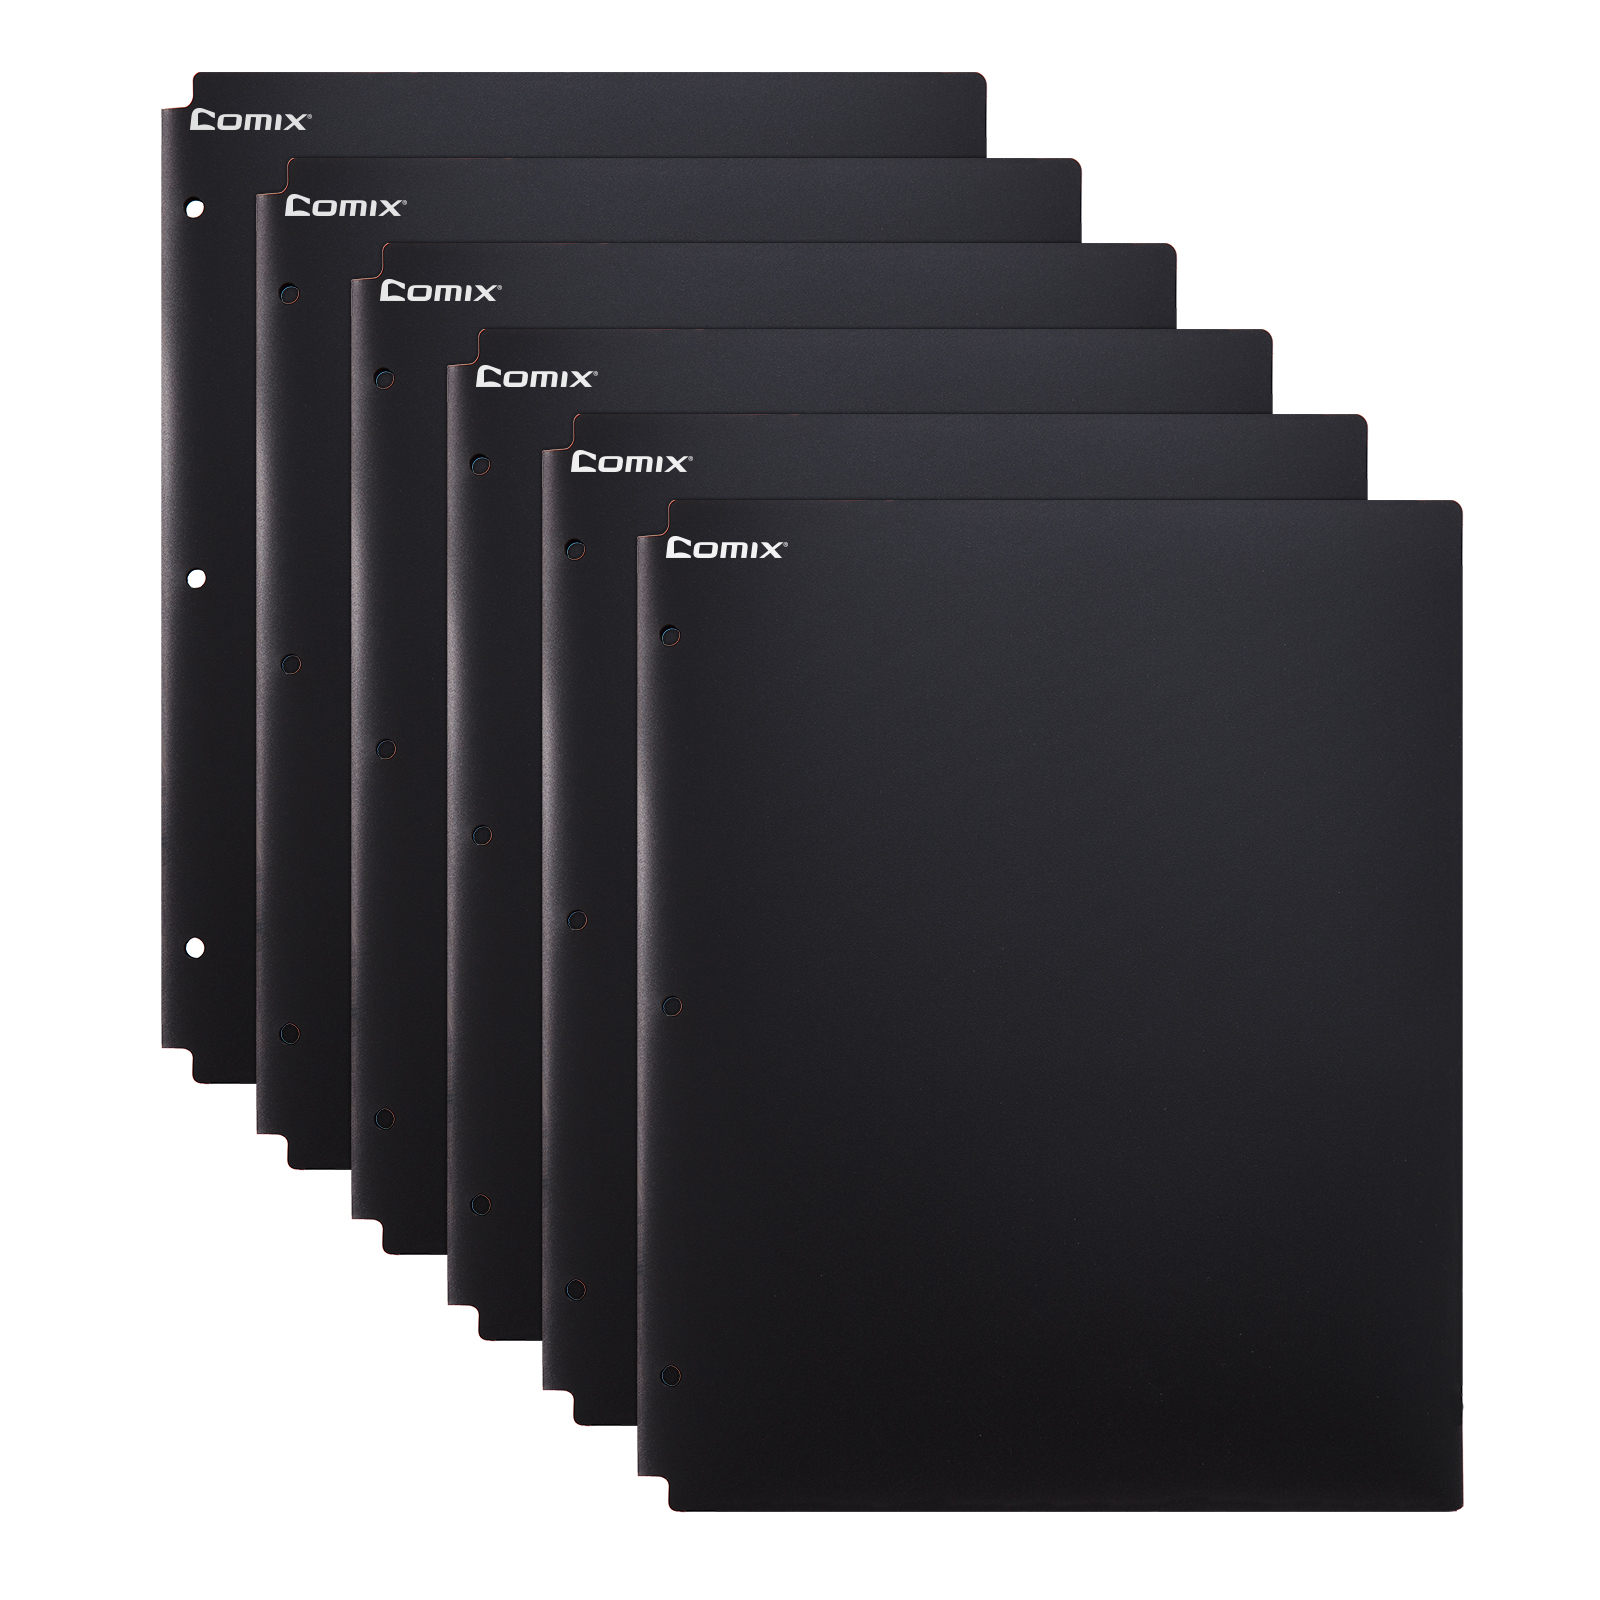 Comix Plastic Folders with 2 Pocket and 3 Holes, Binder Folders with Pockets Hold Letter Size Paper for School and Office,12 Pack (A2140Black)